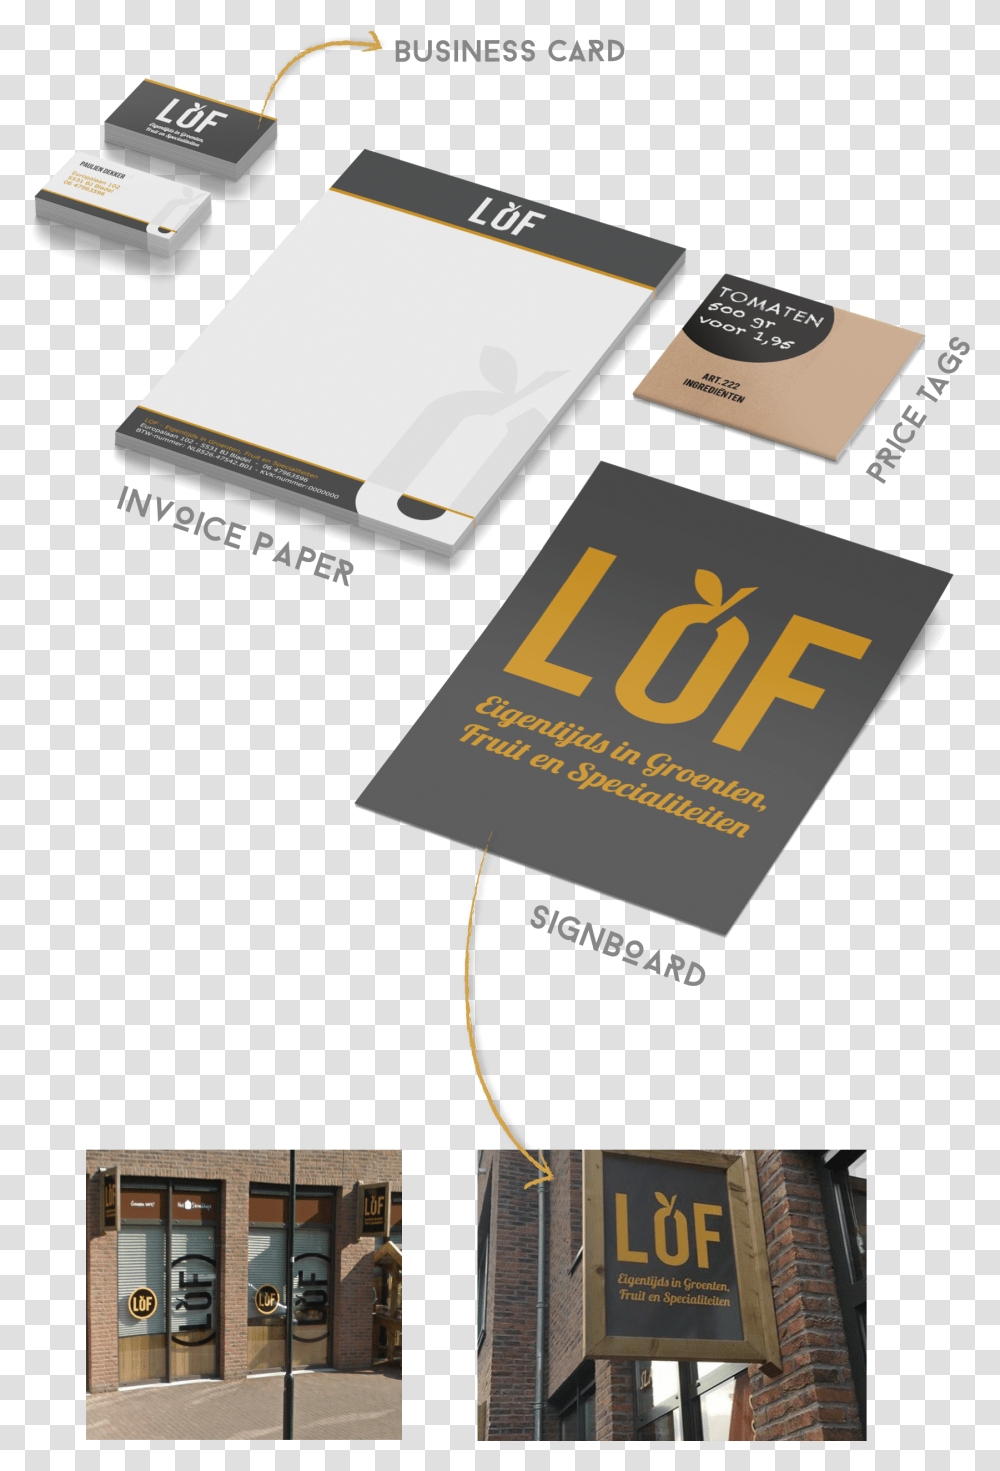 Book Cover, Paper, Business Card Transparent Png